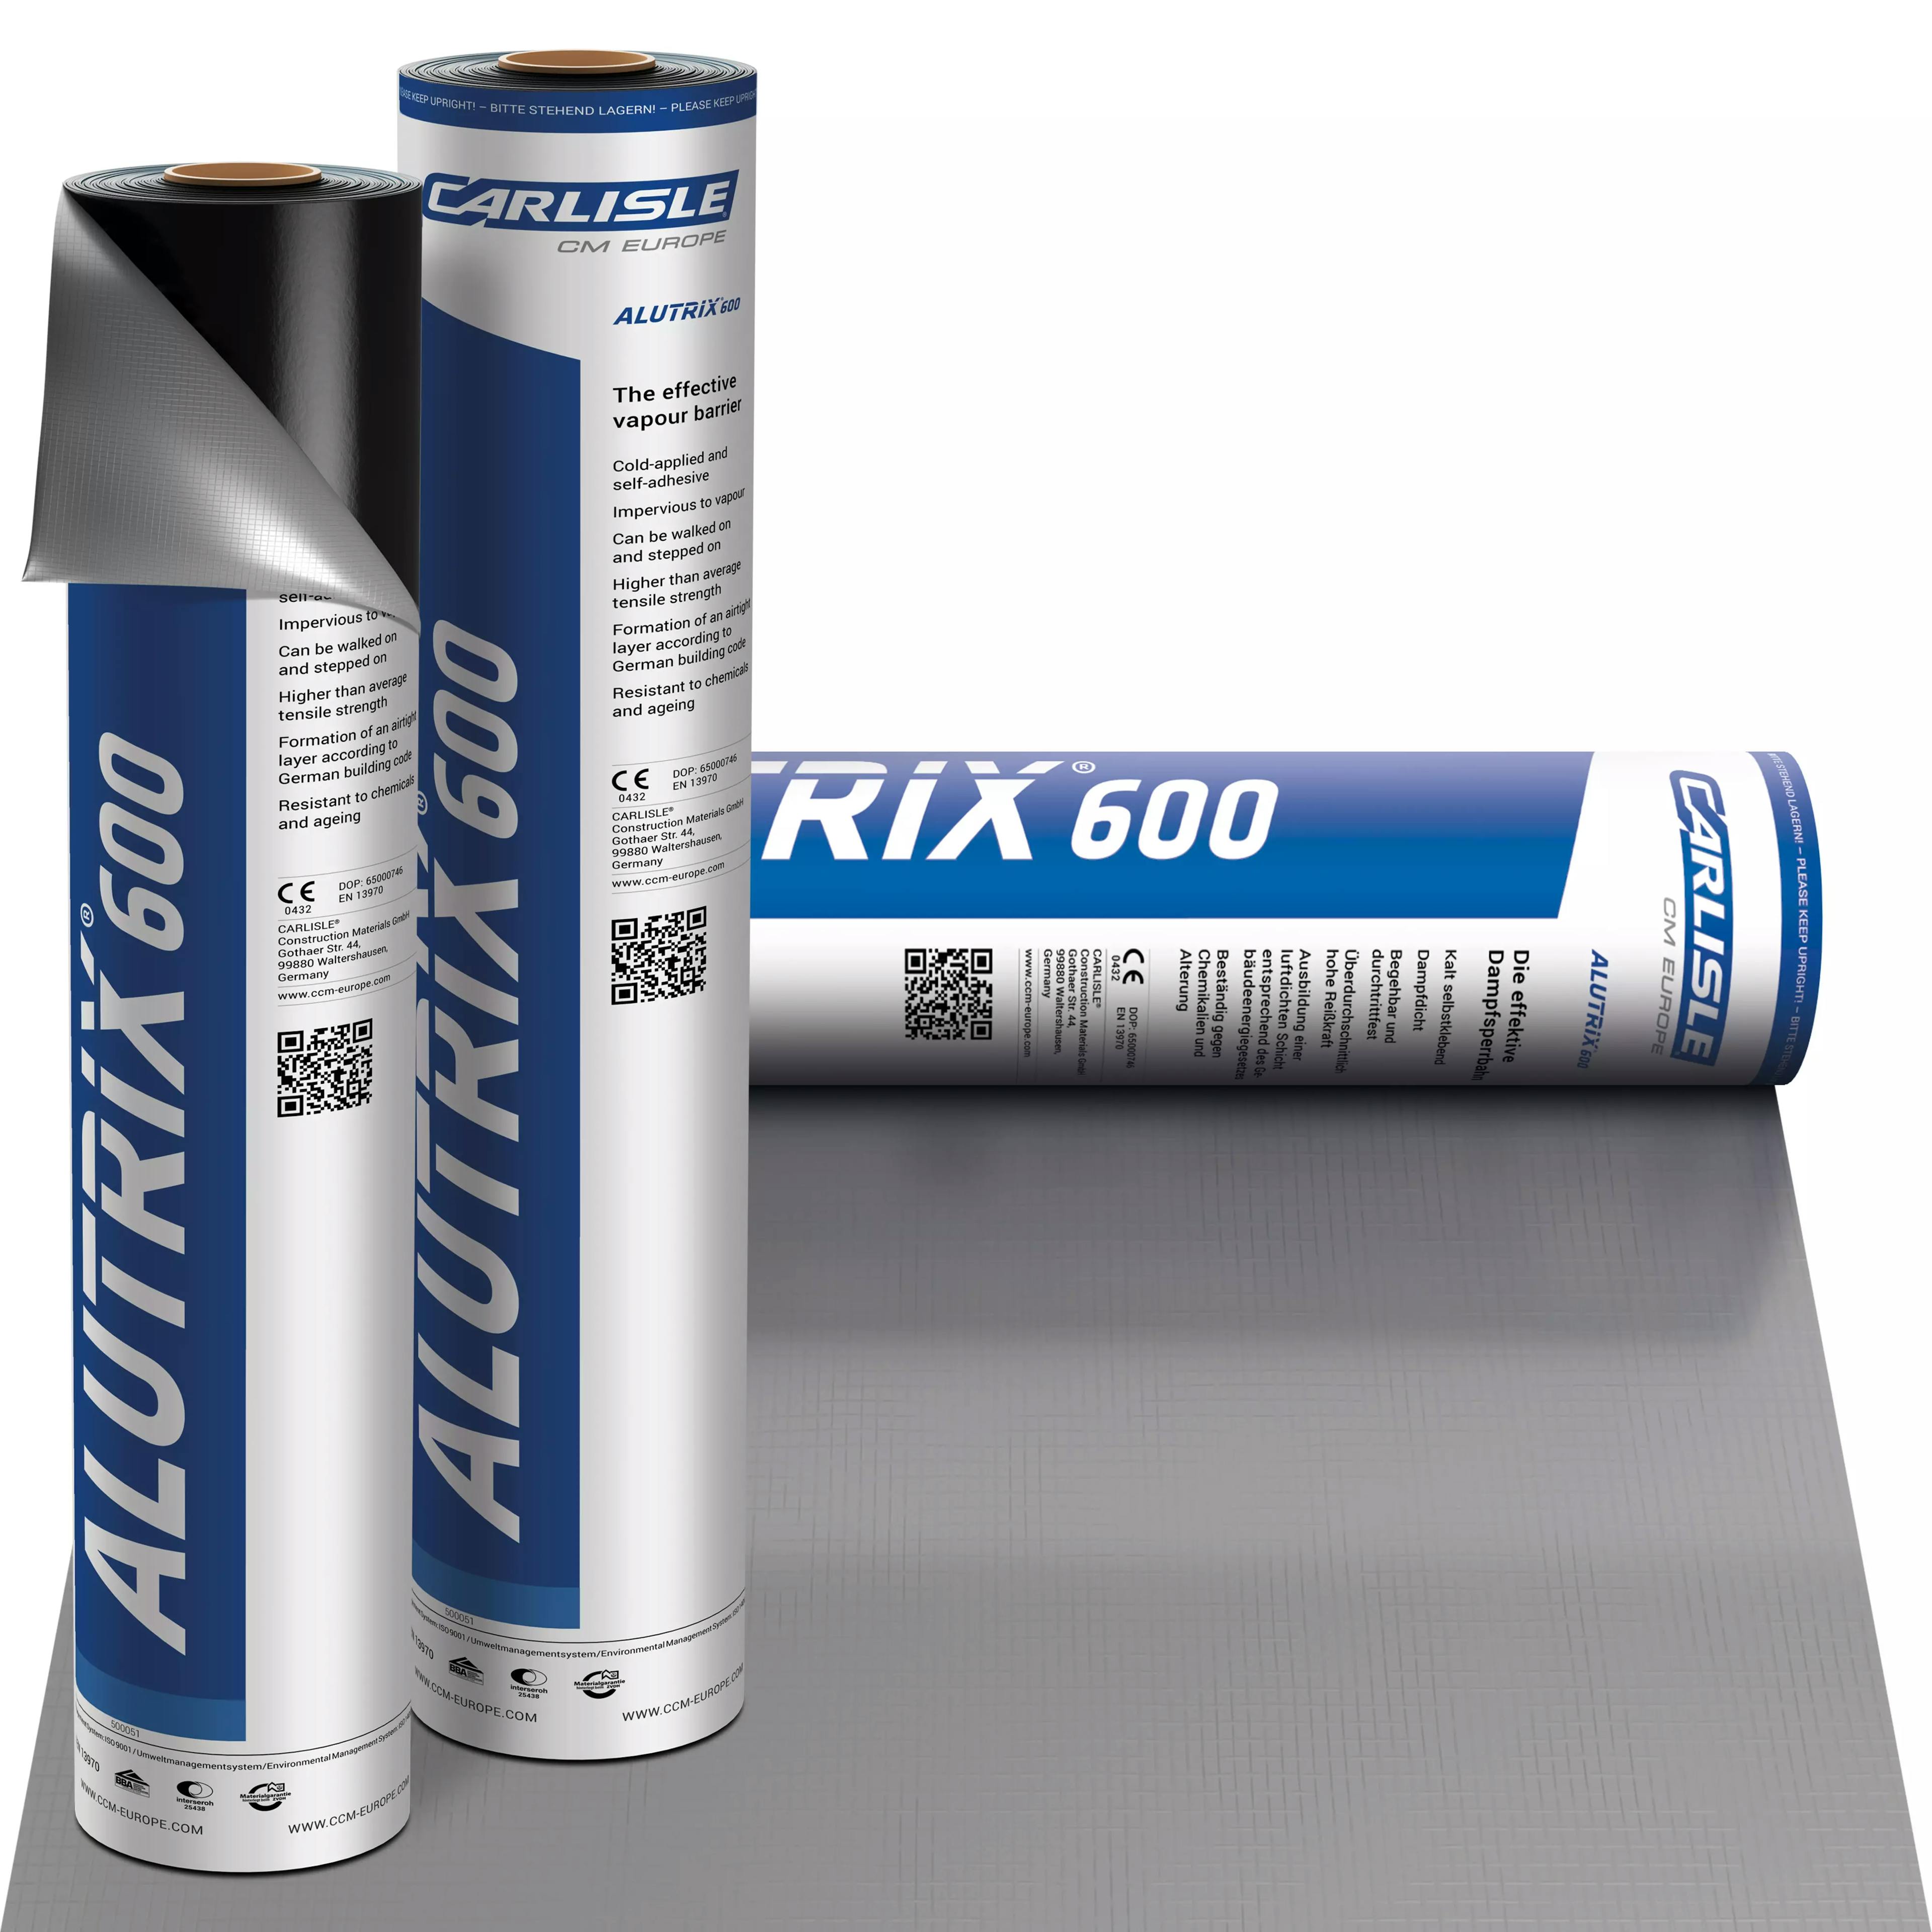 Three rolls of self adhesive vapour barrier by carlisle